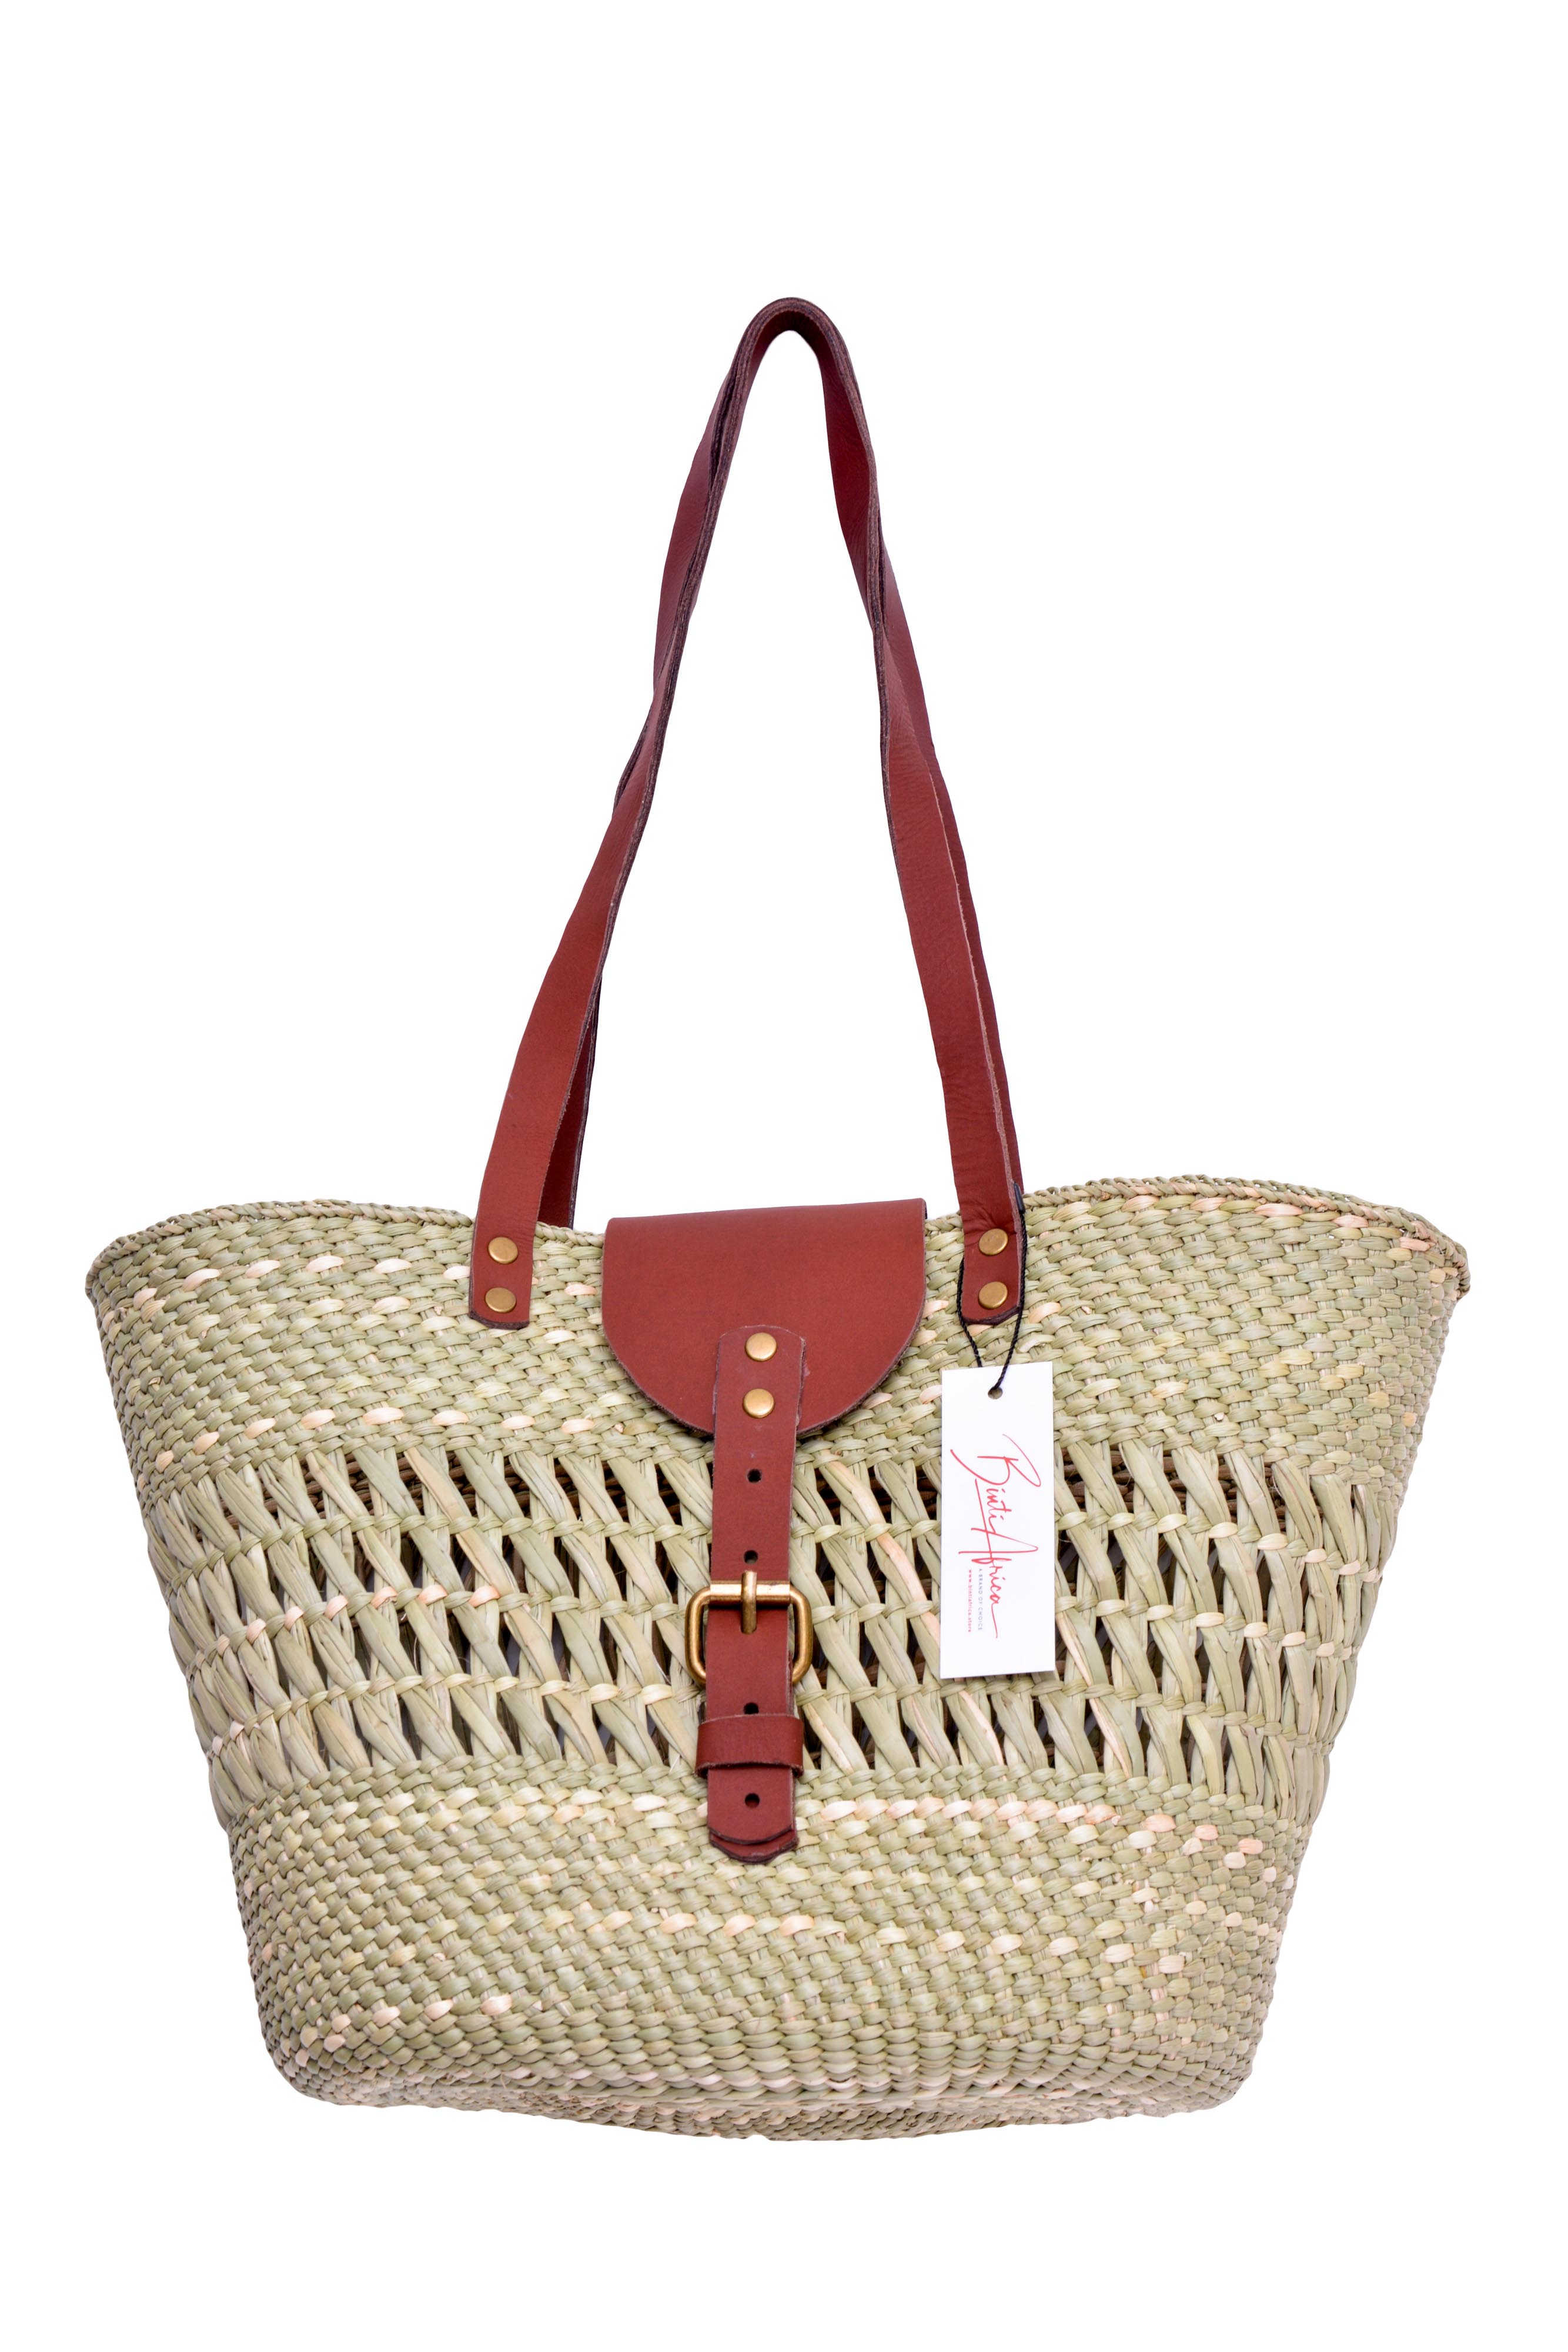 Kagege Open Side Everyday Use Handmade African Basket:Perfect for Vacations and Beach Travel